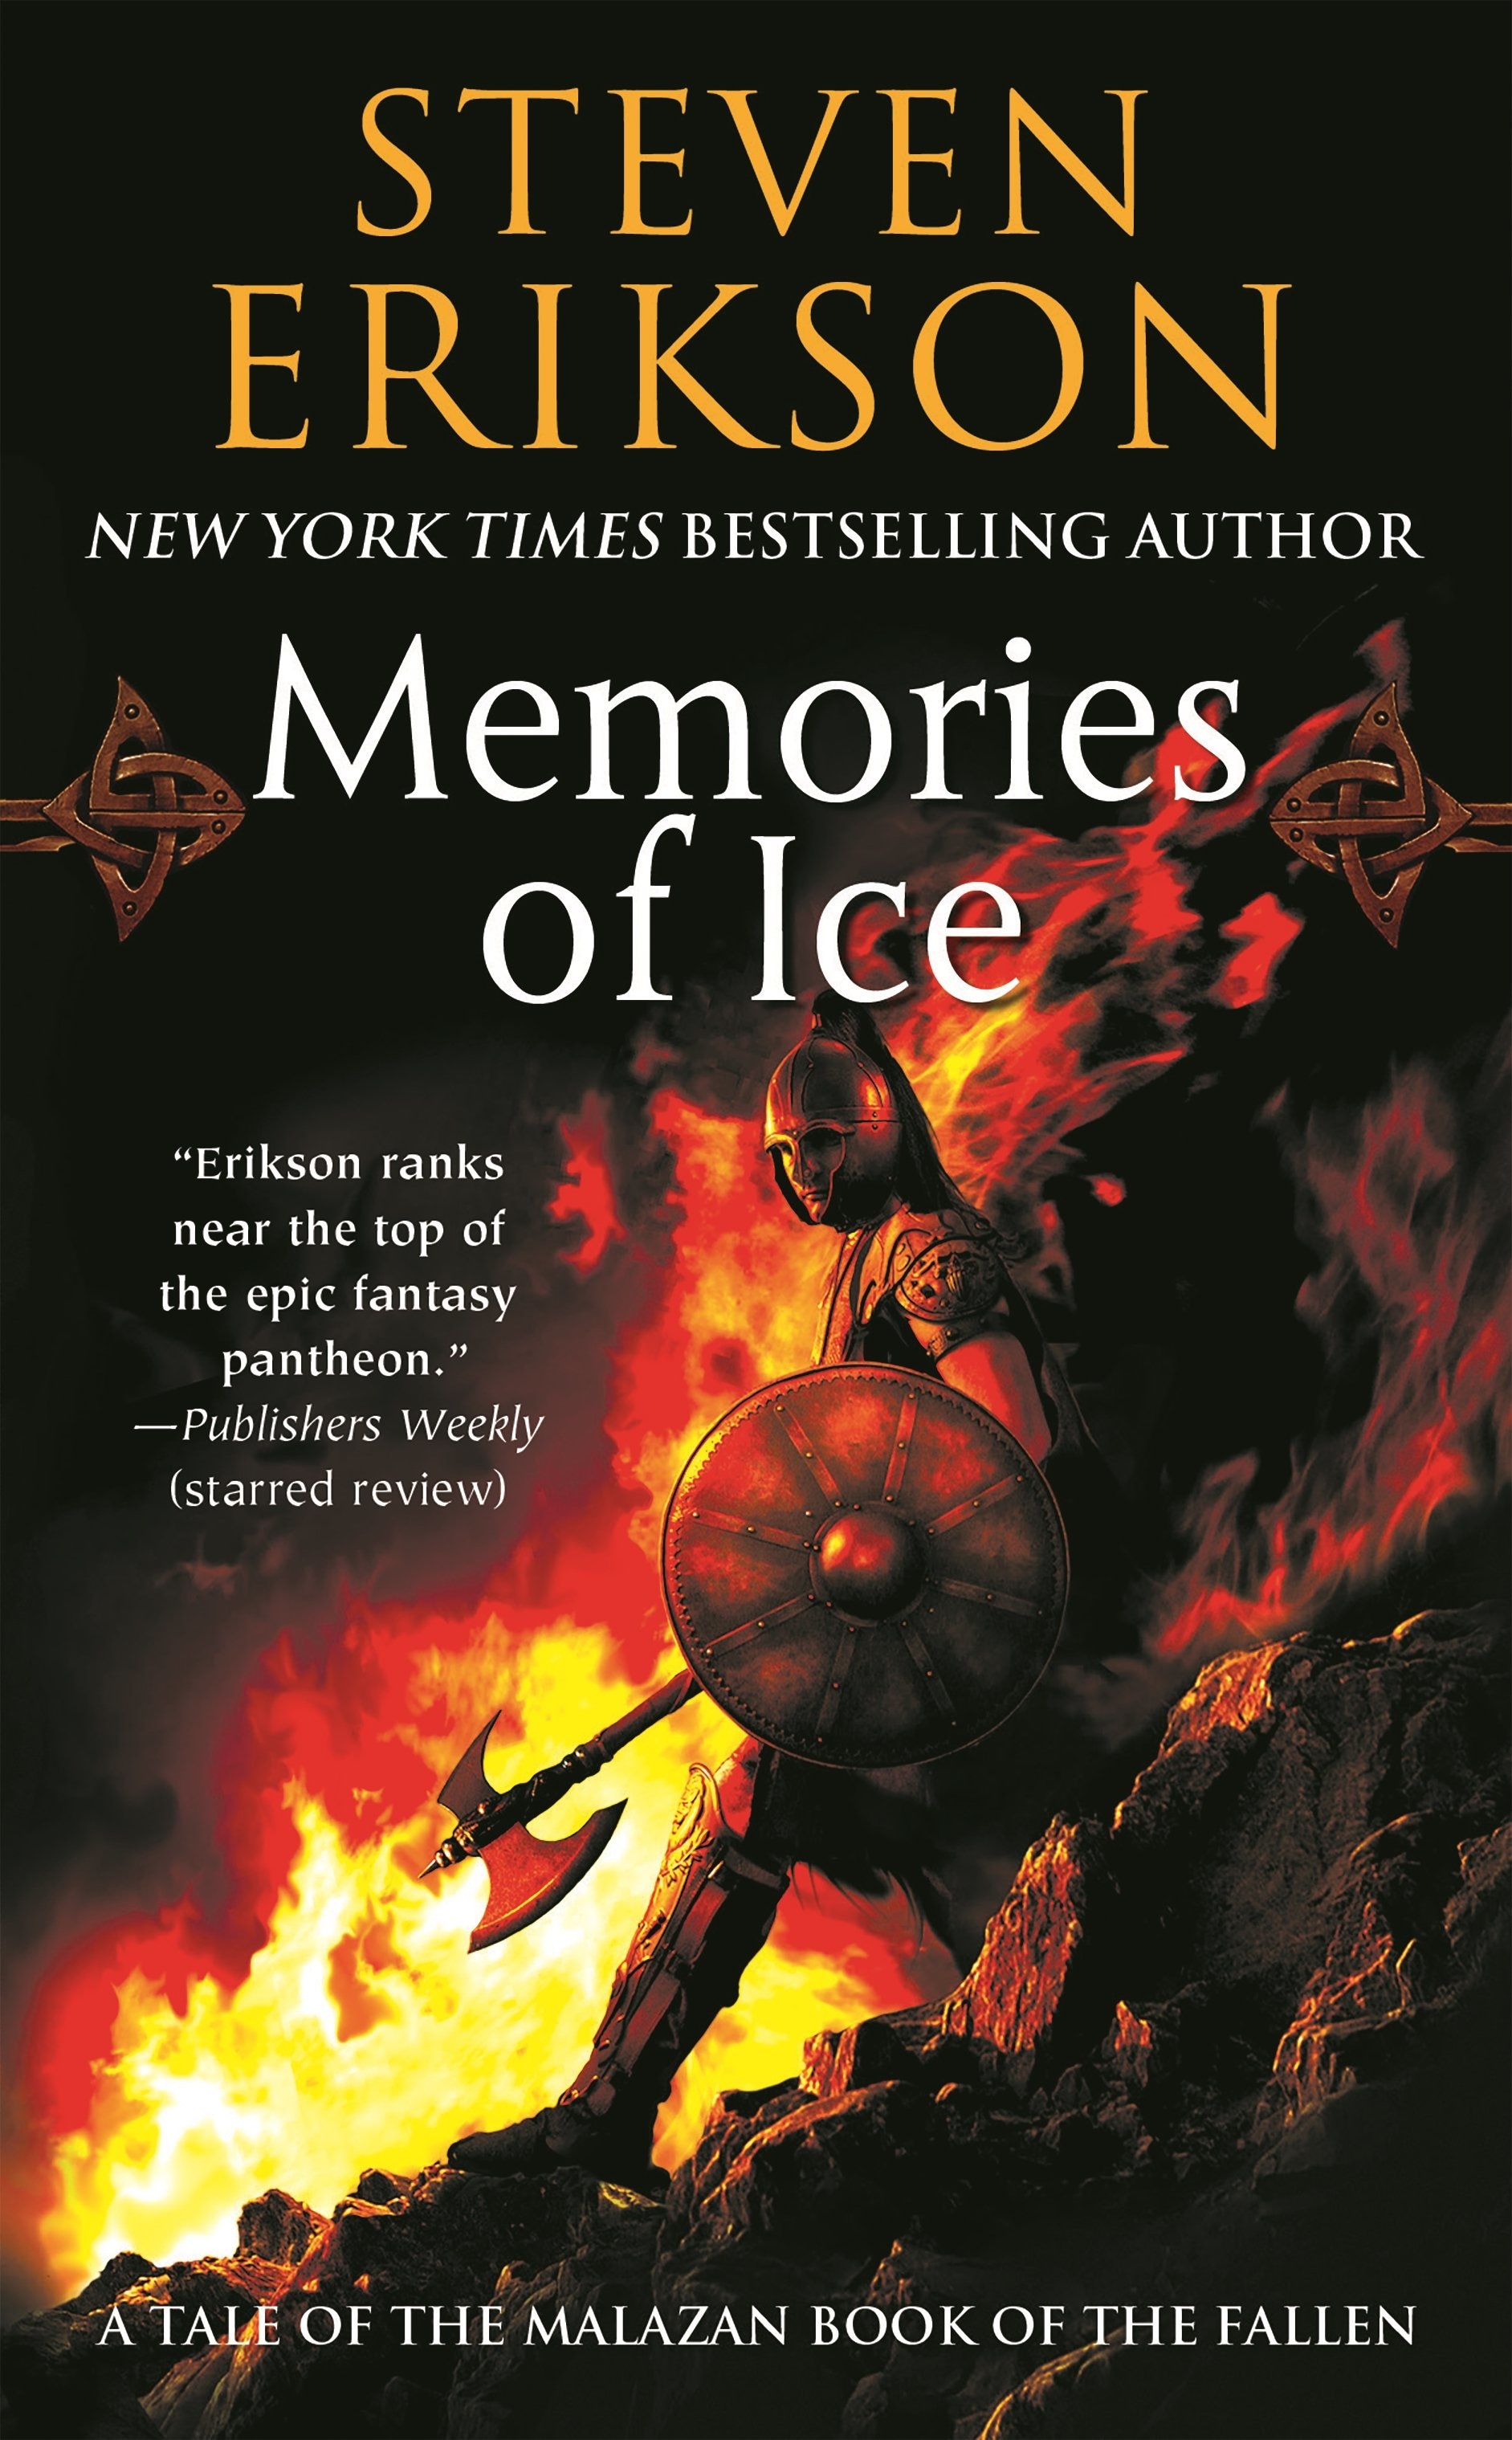 Book “Memories of Ice” by Steven Erikson